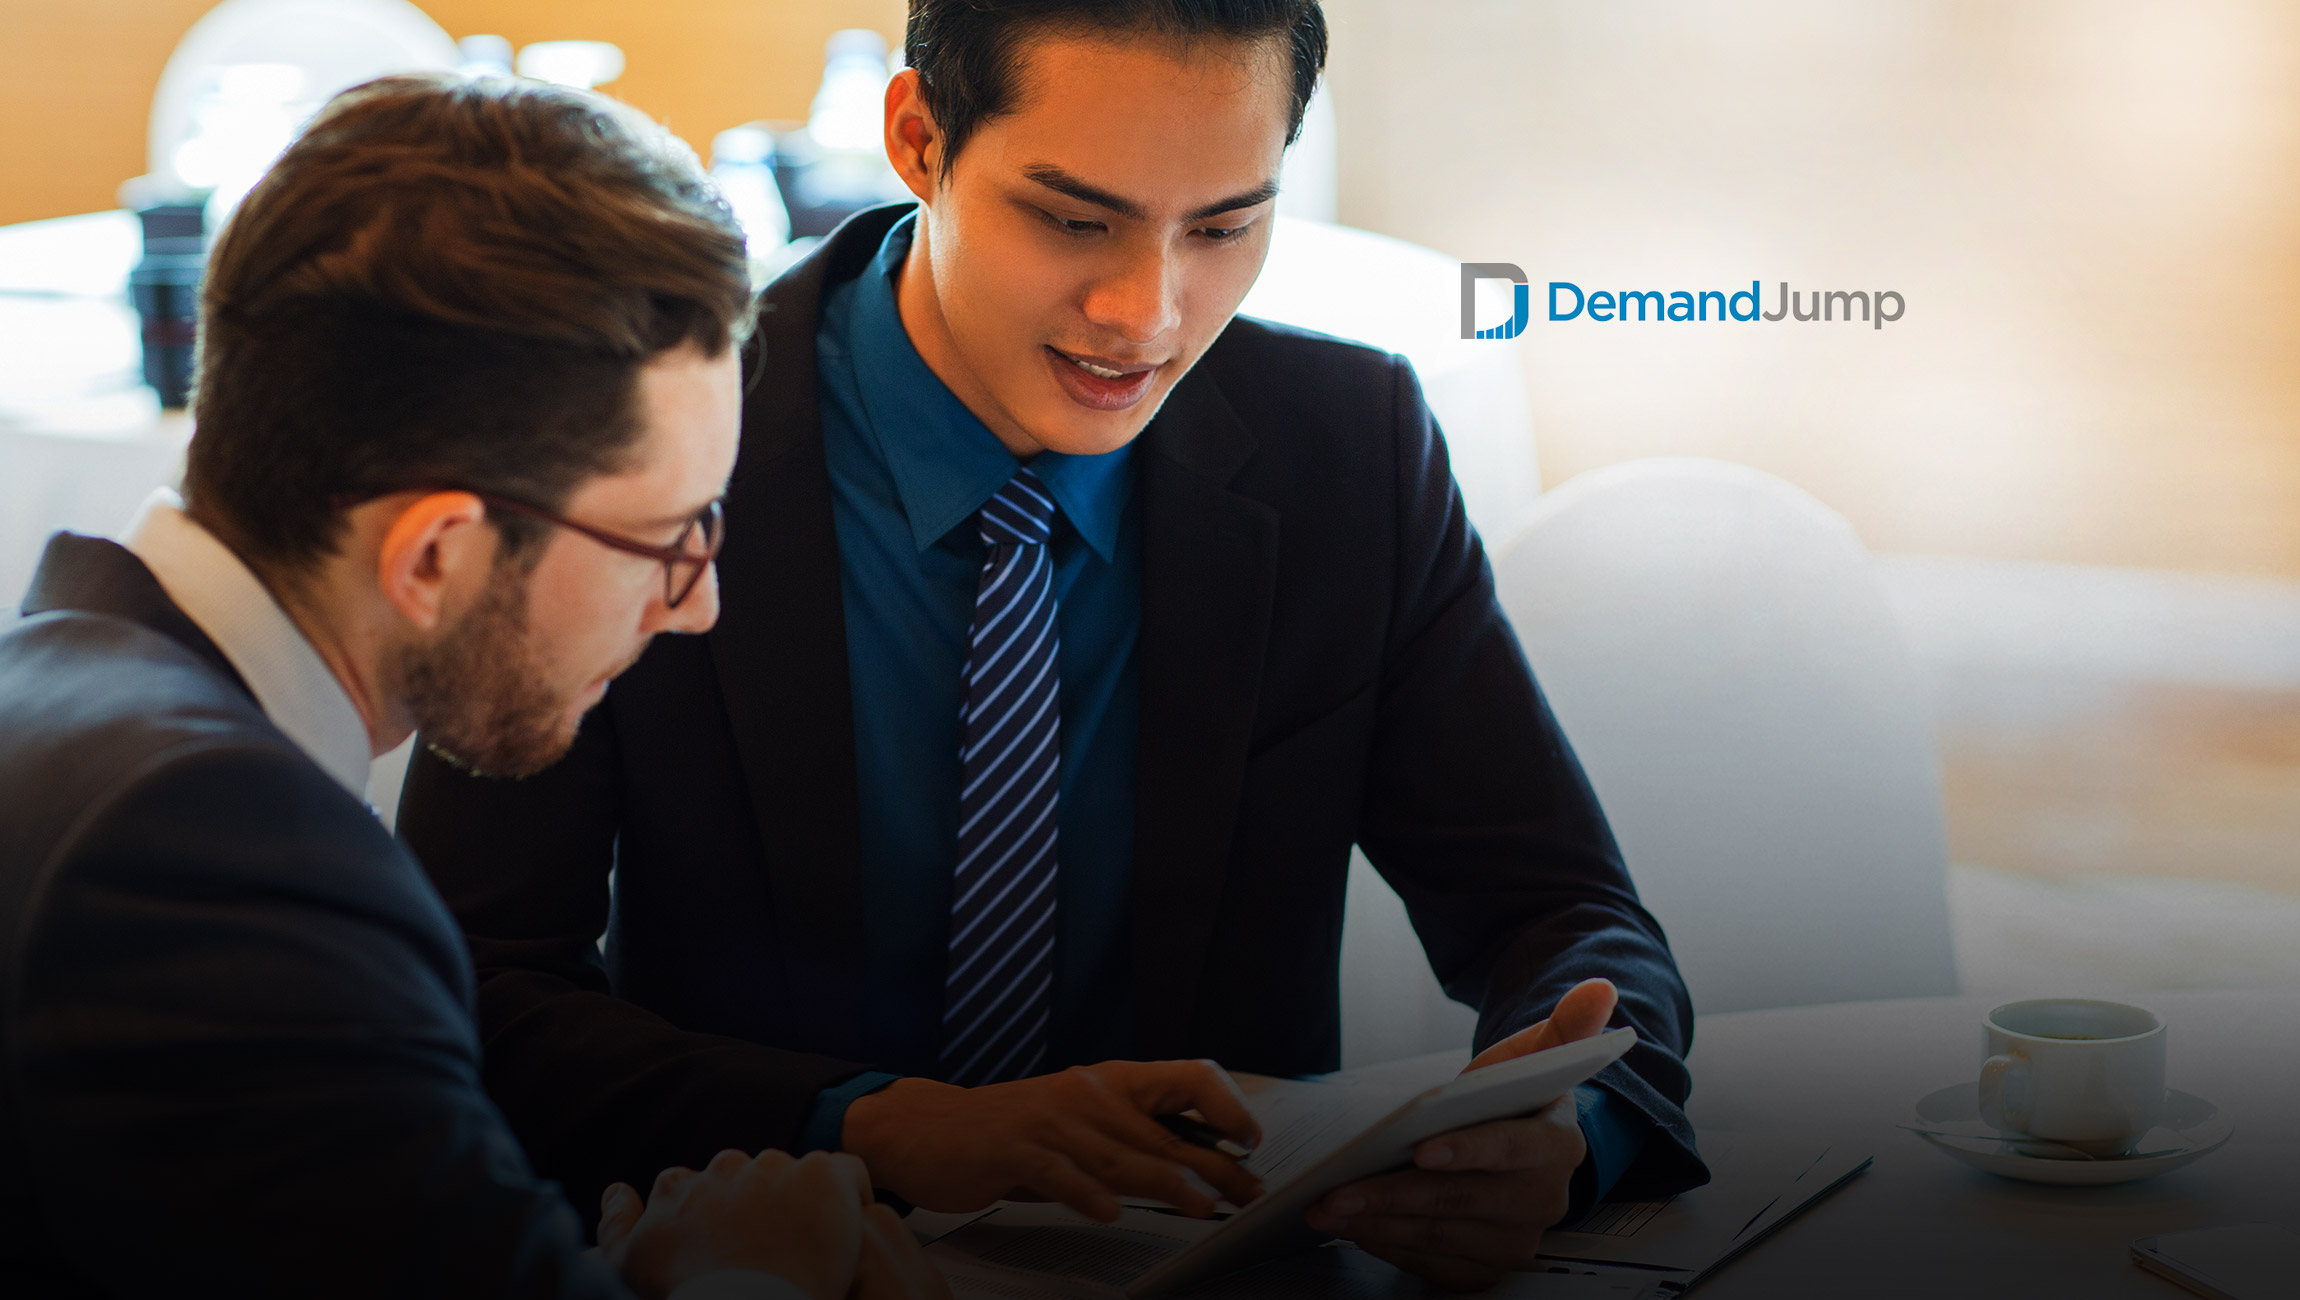 DemandJump-Announces-Insights-for-Content_-Automating-Content-Strategy-and-Research